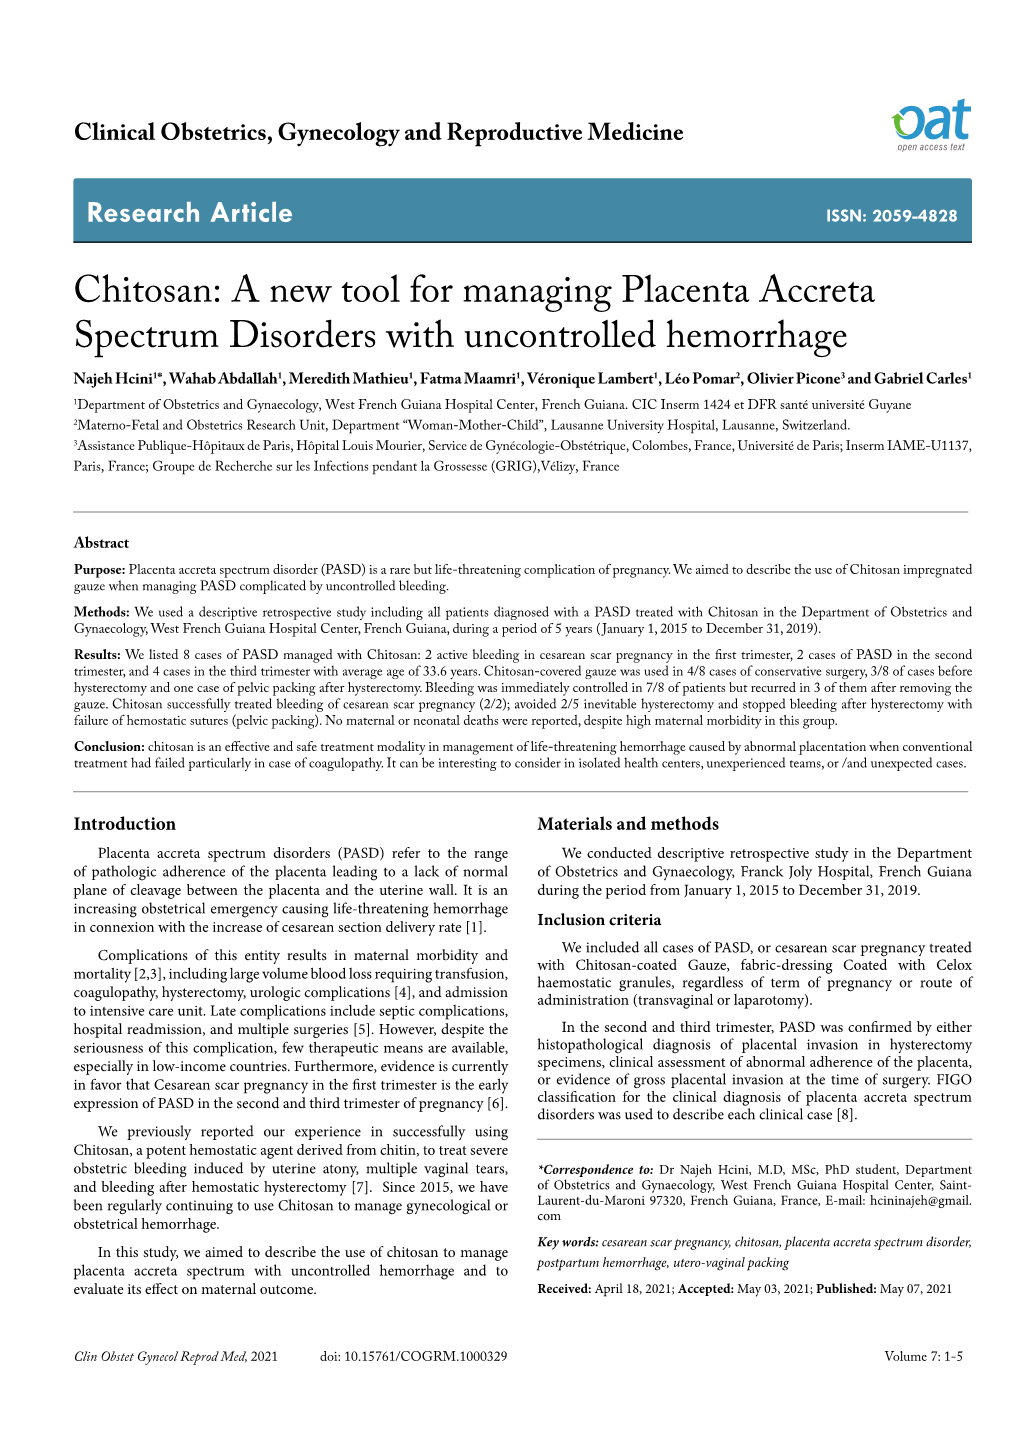 Chitosan: a New Tool for Managing Placenta Accreta Spectrum